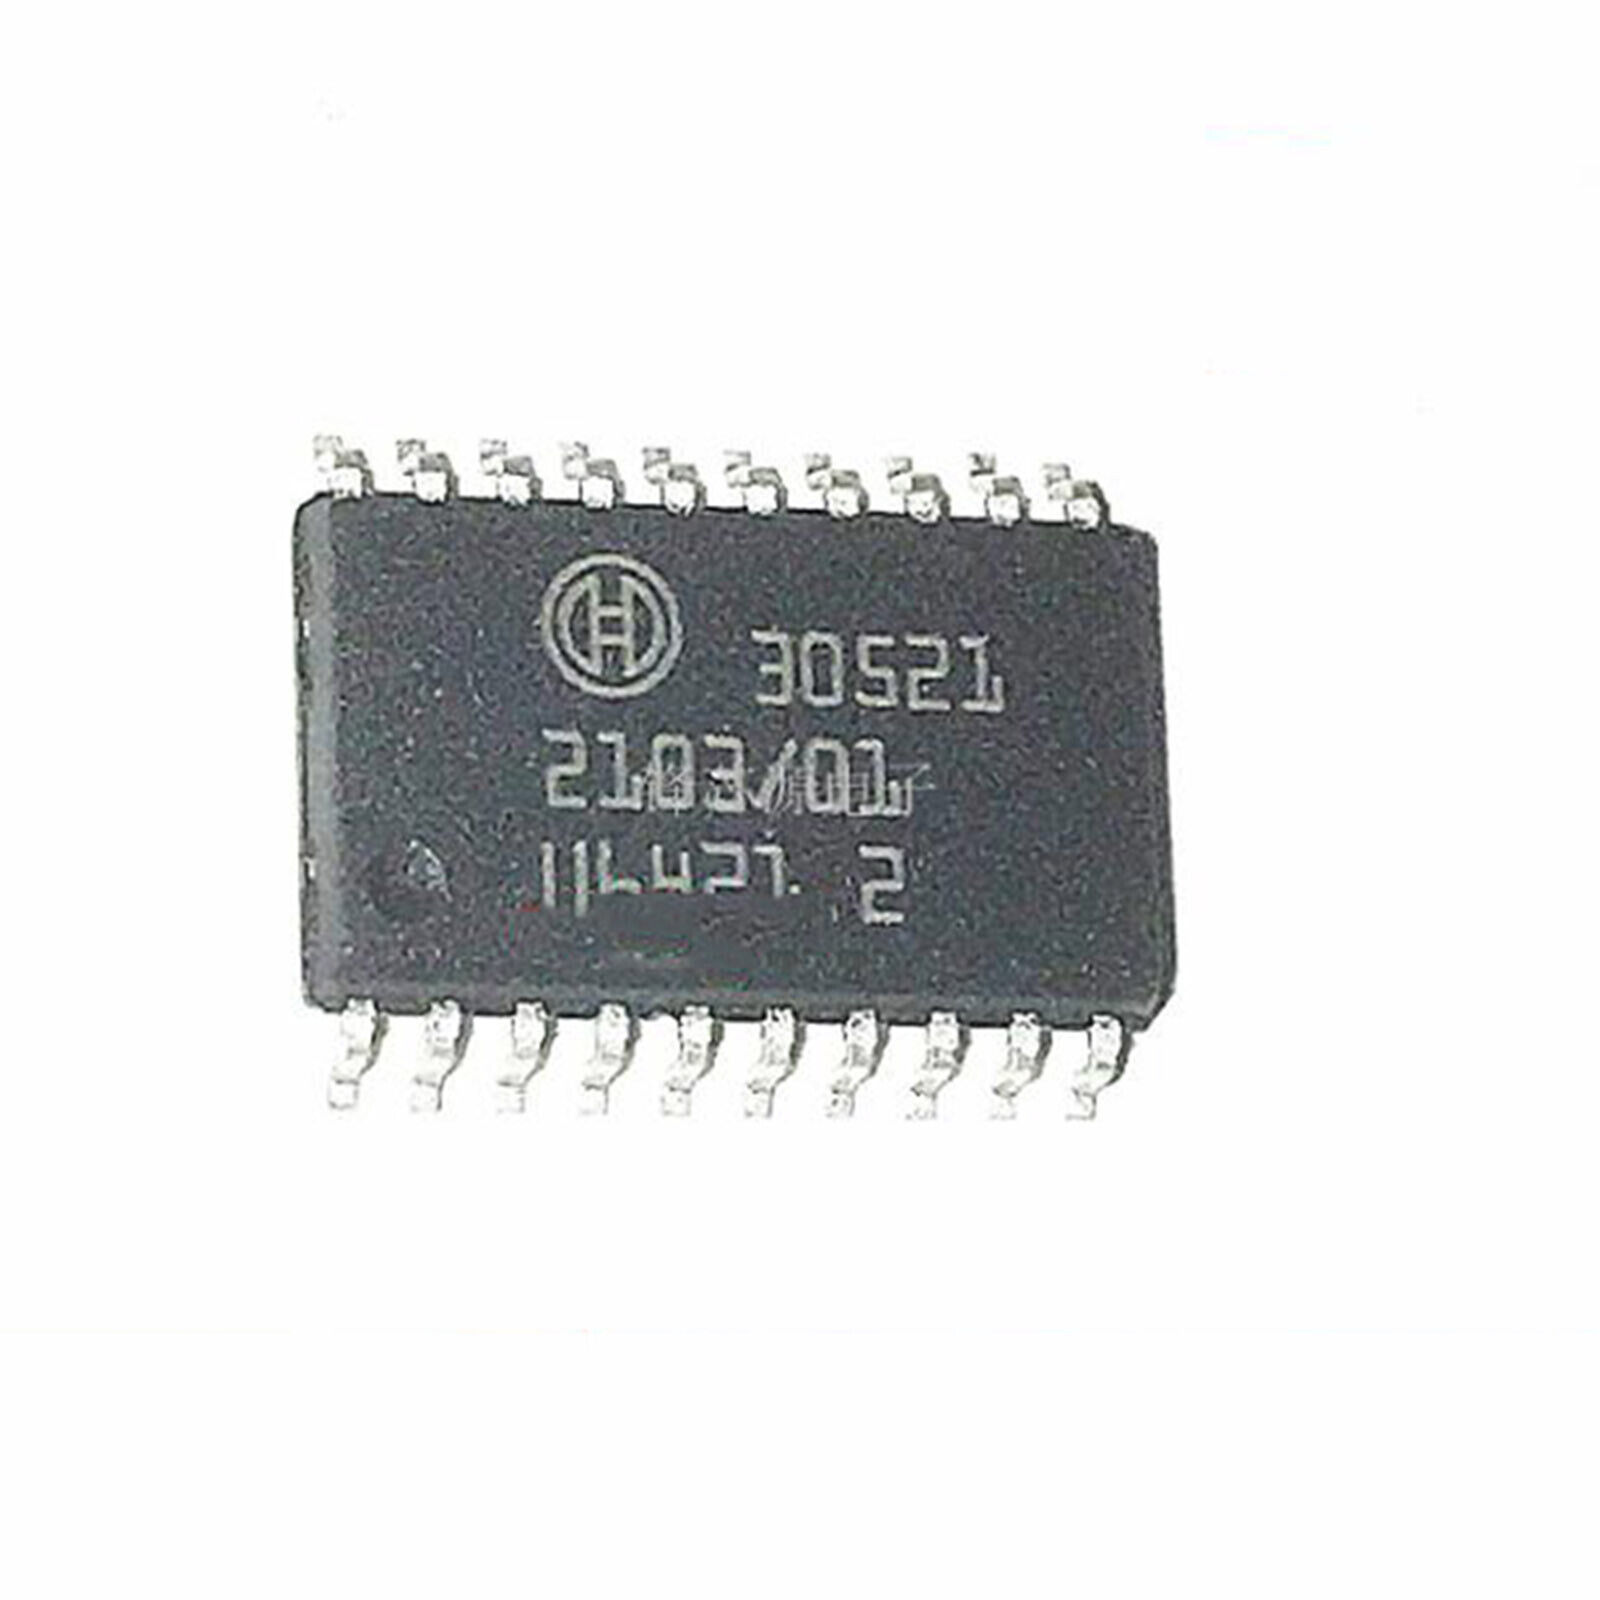 30521 Car Computer Board Vulnerable Driver Chip Car Chip Ic #us